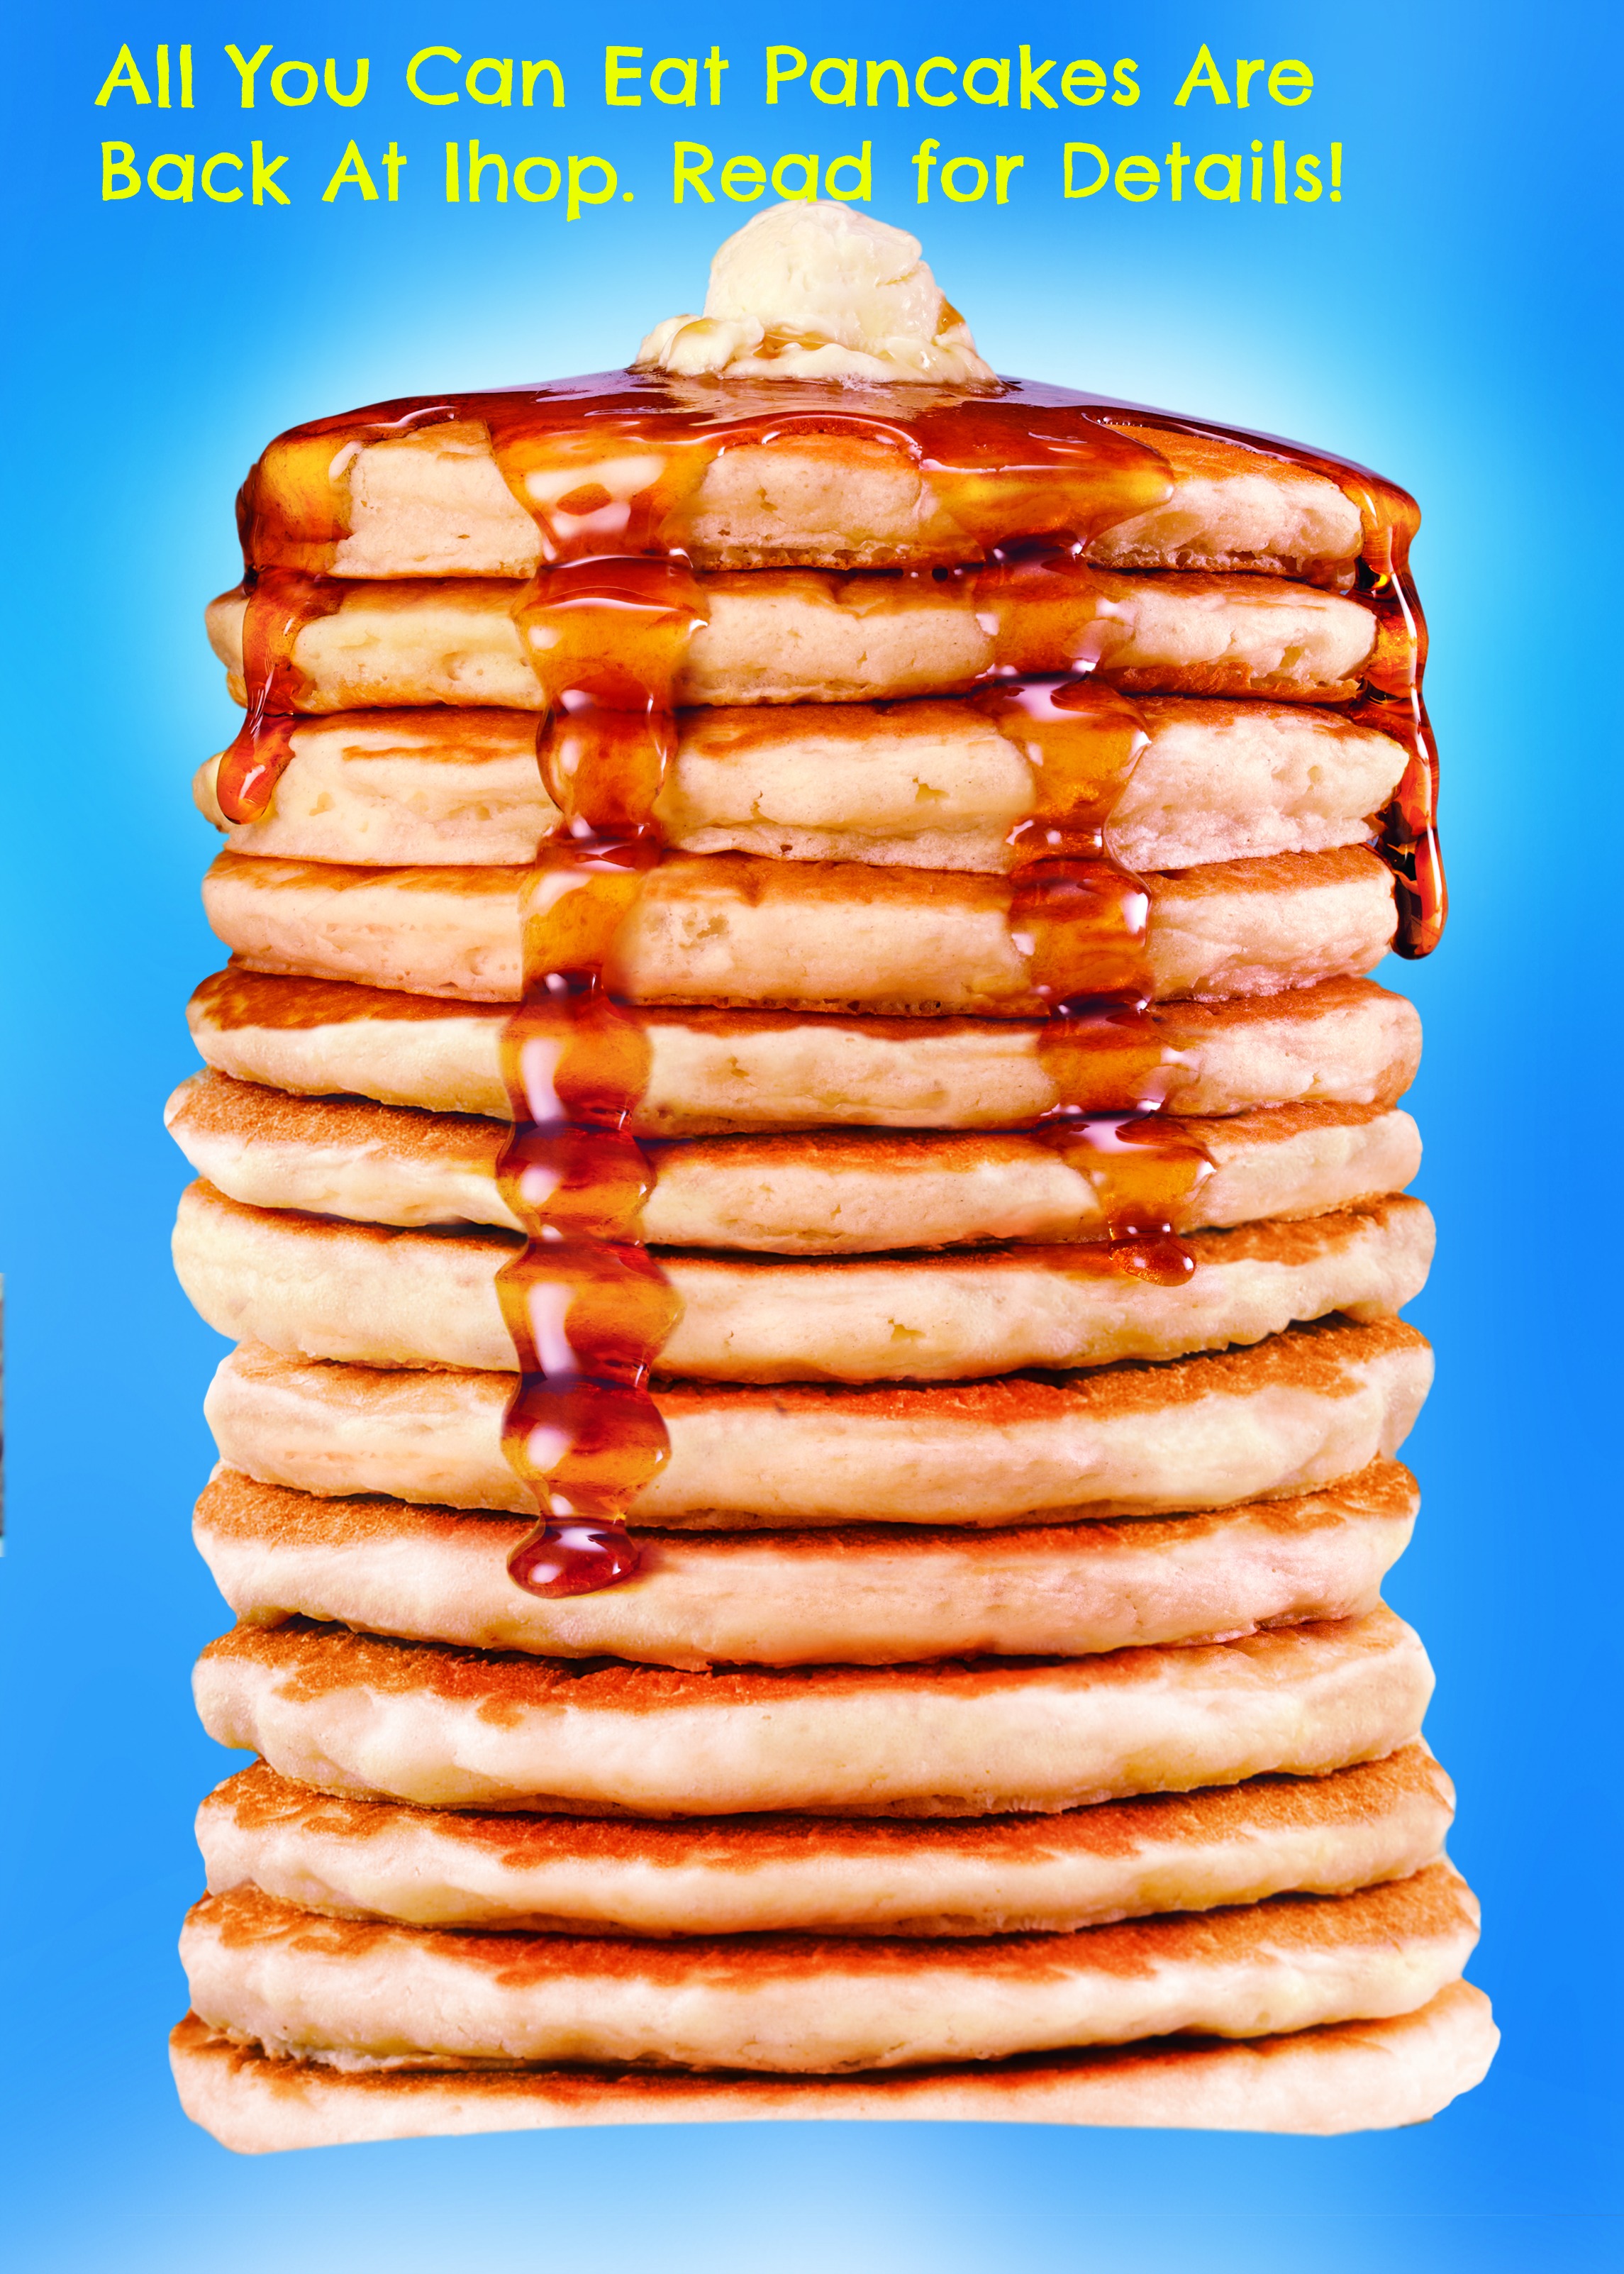 All You Can Eat Pancakes are Back at Ihop - EAT DRINK OC